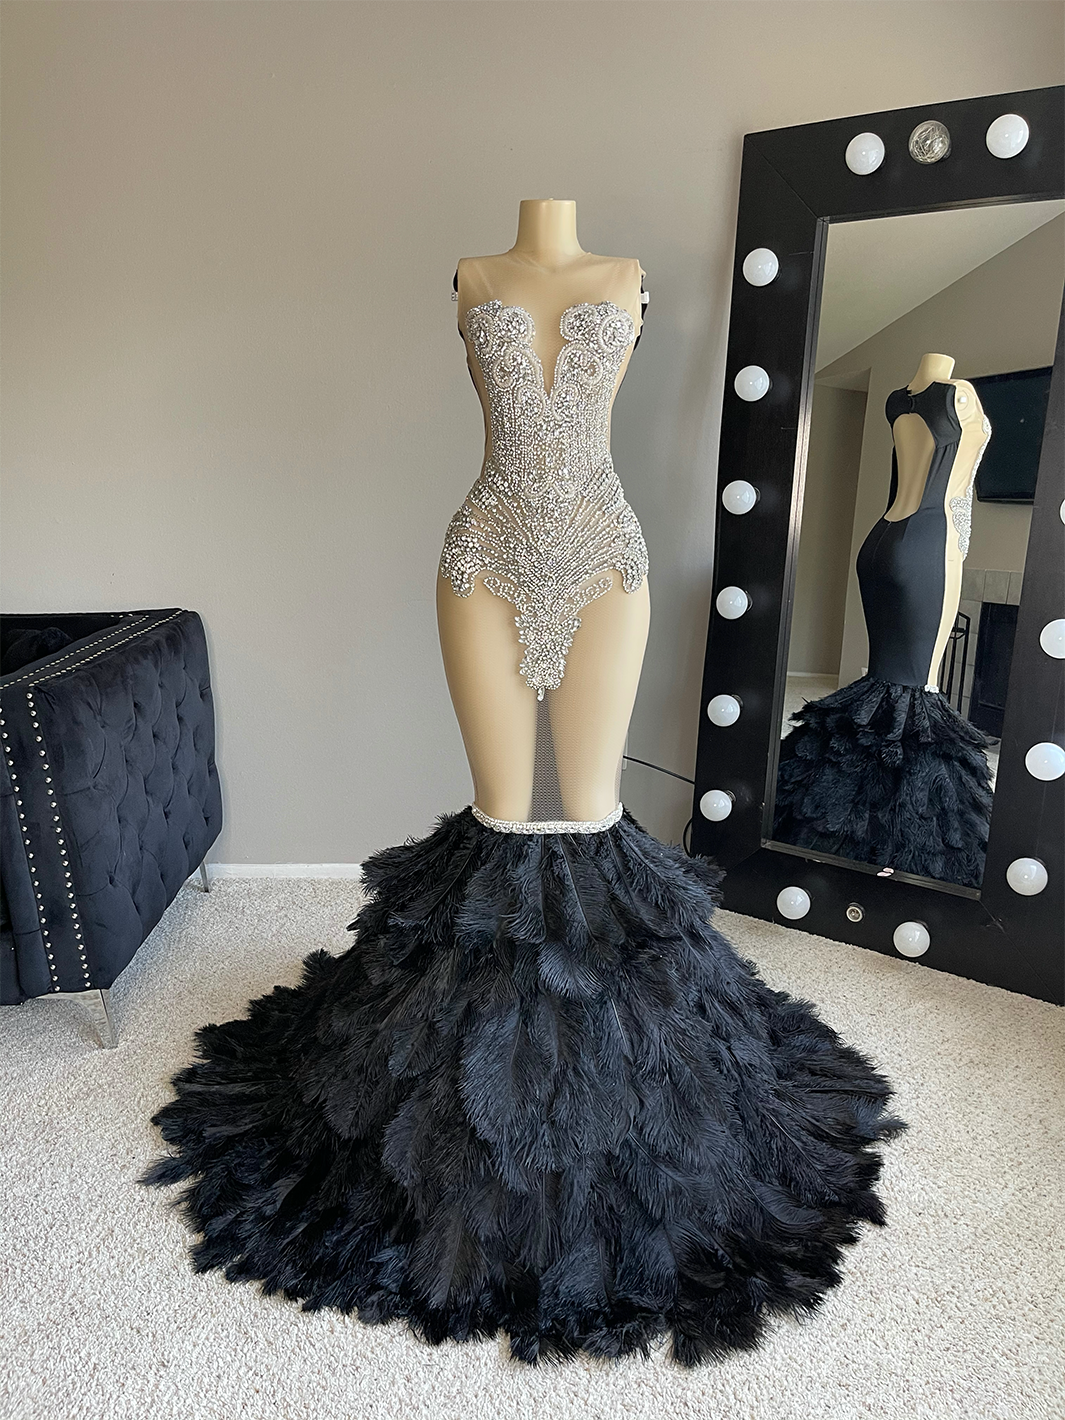 Crystal Dress with Black Ostrich feathers